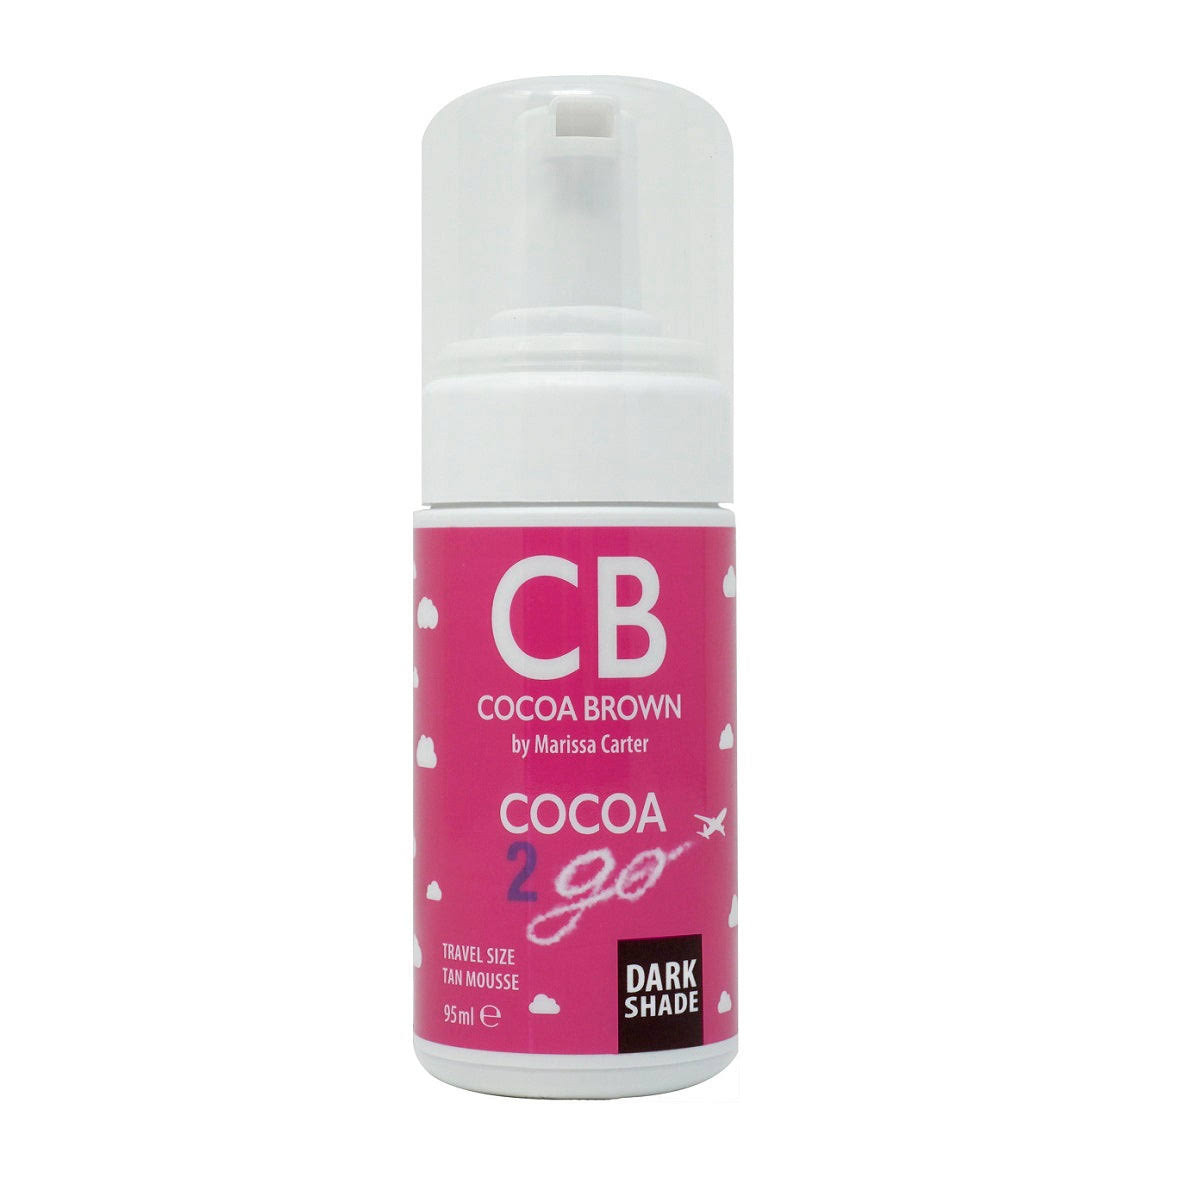 Cocoa Brown - 1 Hour Tan Mousse Travel Size - 95ml - Dark